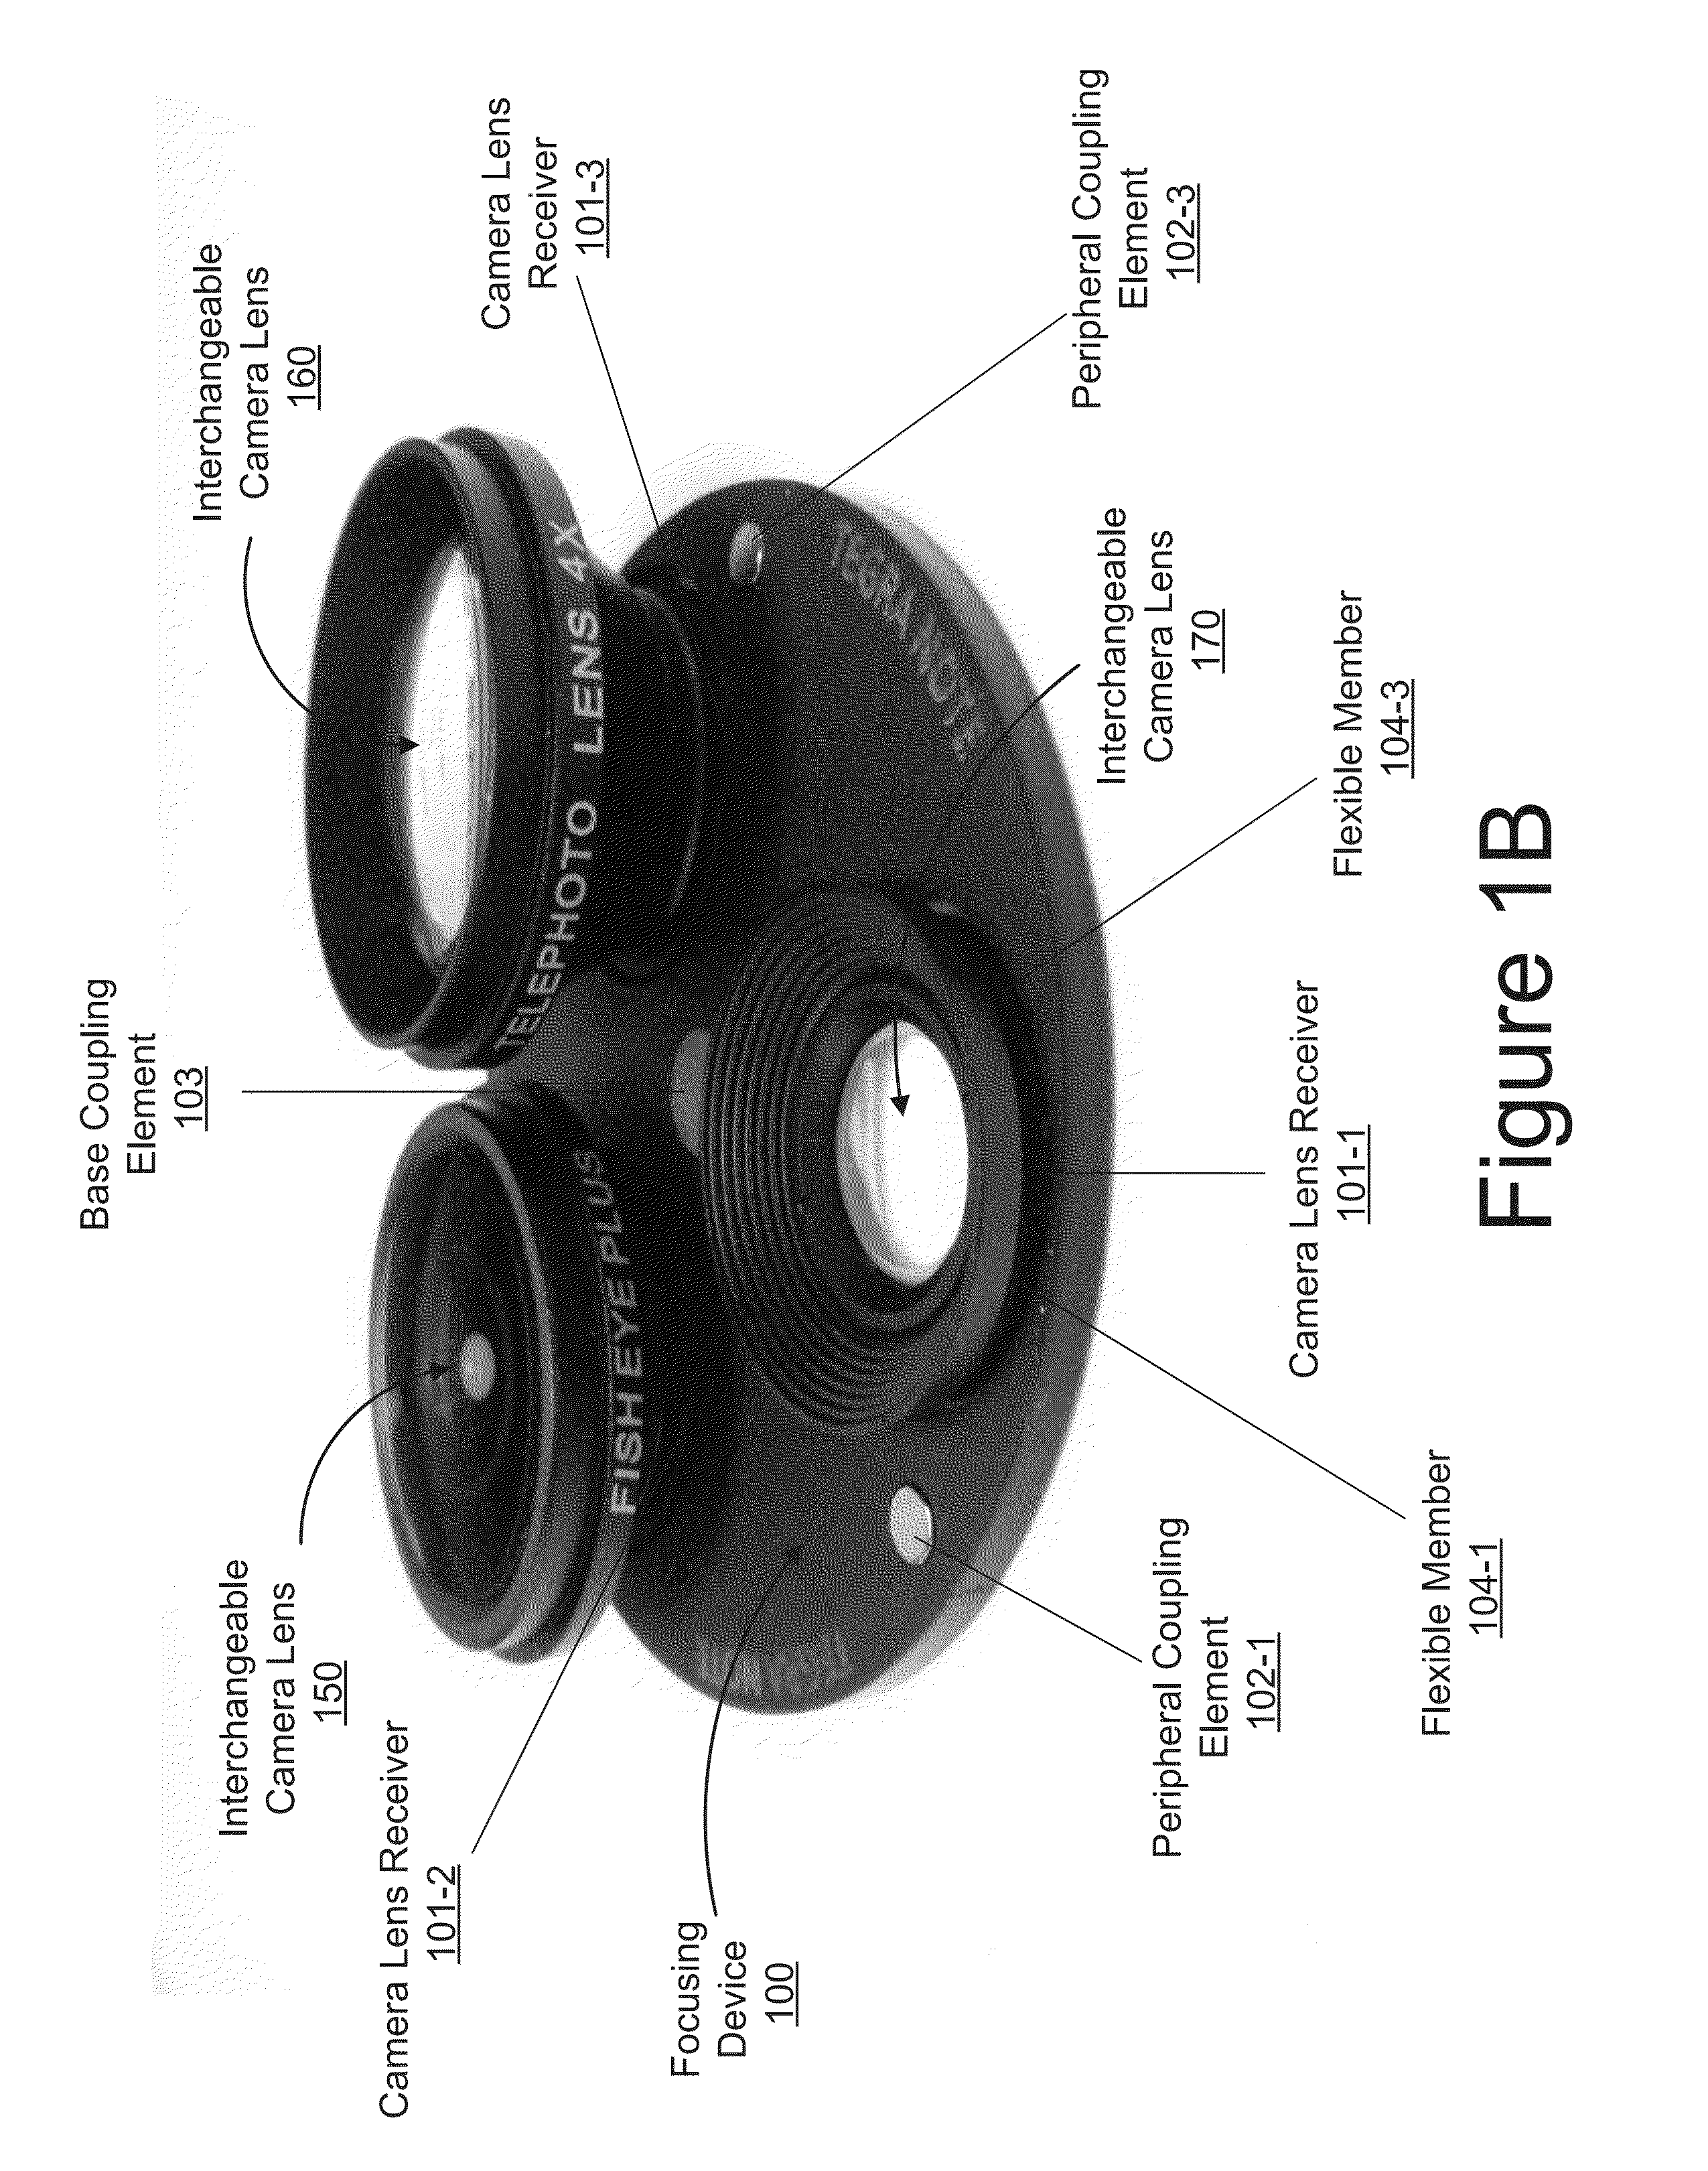 Method and apparatus for augmenting and correcting mobile camera optics on a mobile device